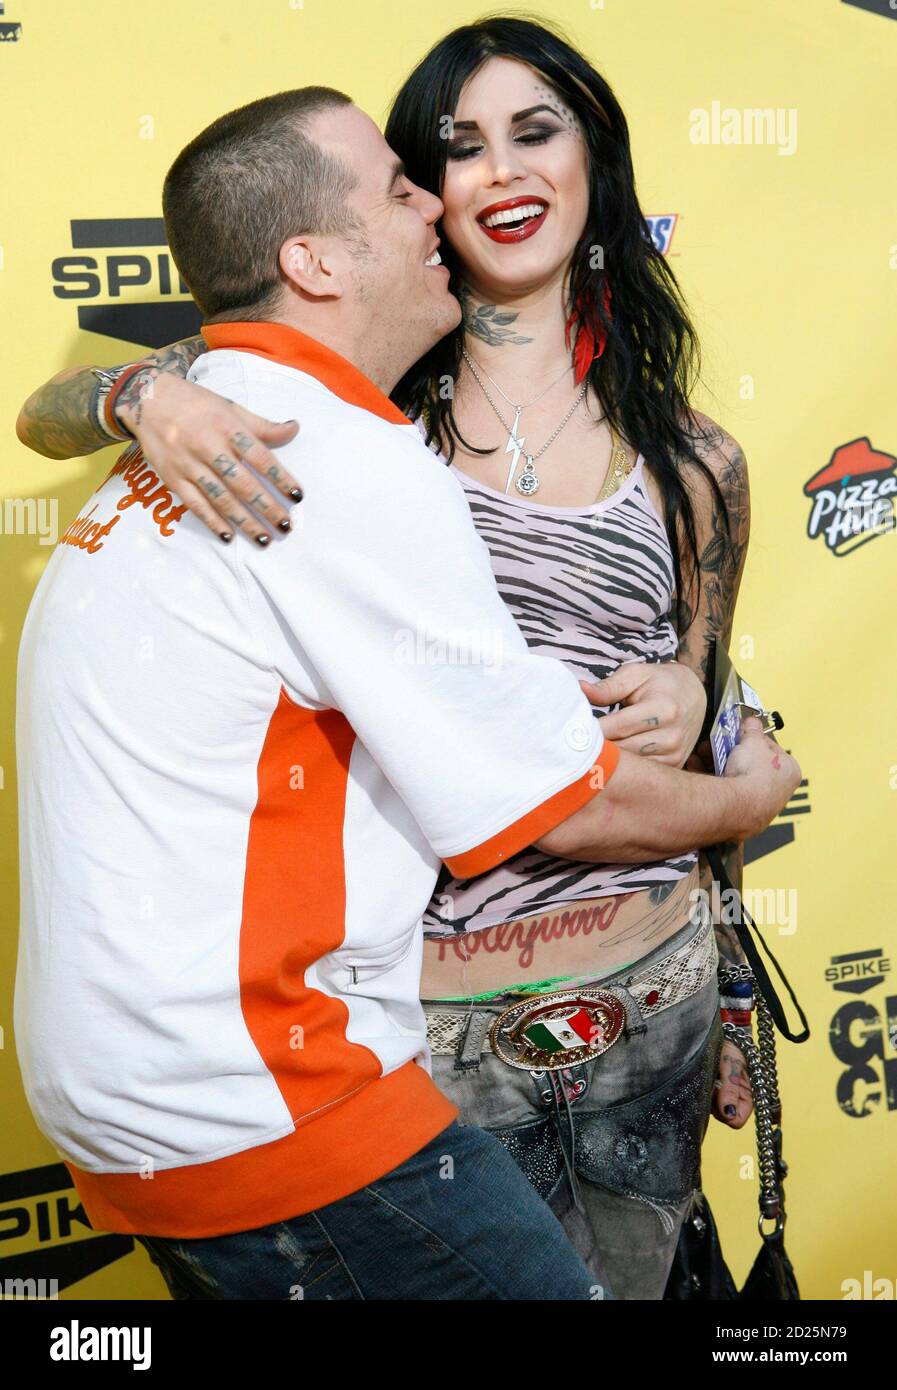 Uredelighed Omgivelser kapitel Steve-O (L) and tattoo artist Kat Von D arrive at the first annual Spike  television's "Guys Choice" awards show in the Studio City area of Los  Angeles June 9, 2007. REUTERS/Gus Ruelas (